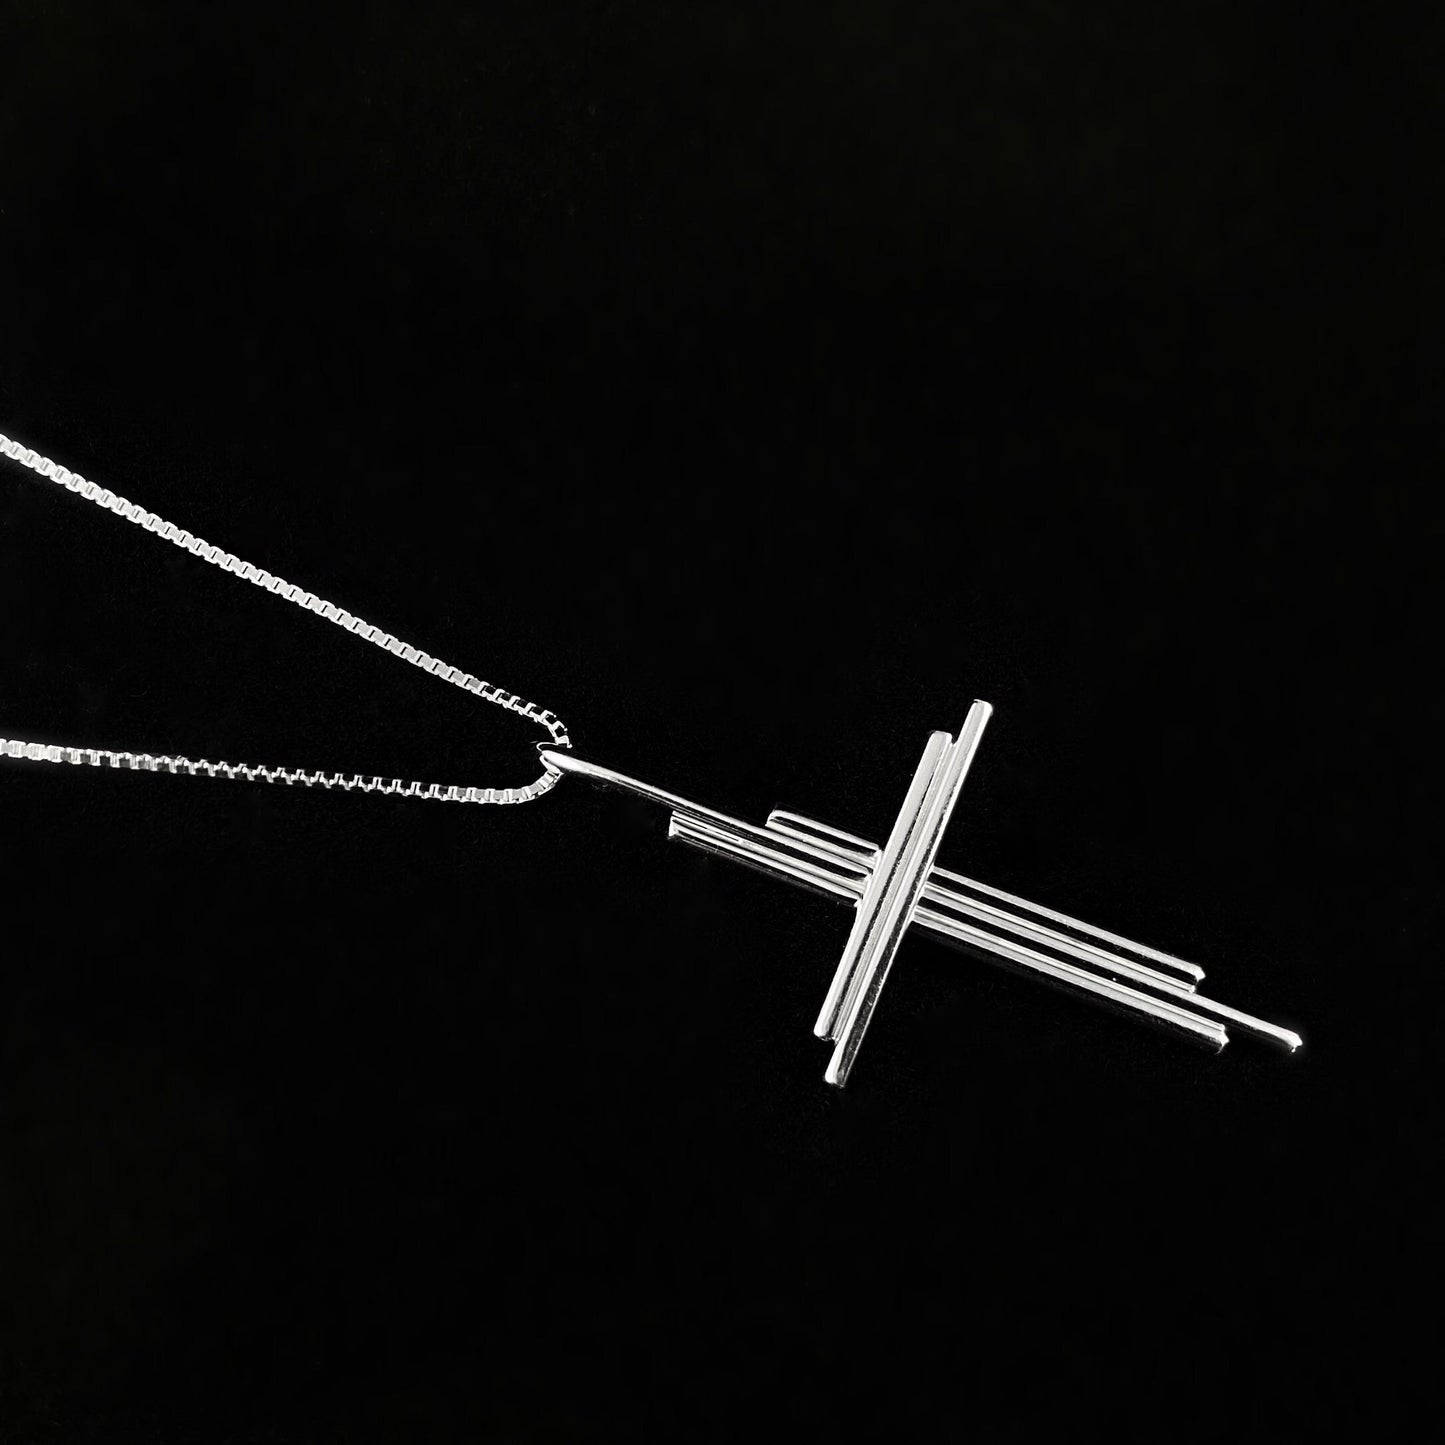 Handmade Sterling Silver Deconstructed Cross Pendant Necklace, Made in USA - Reflections